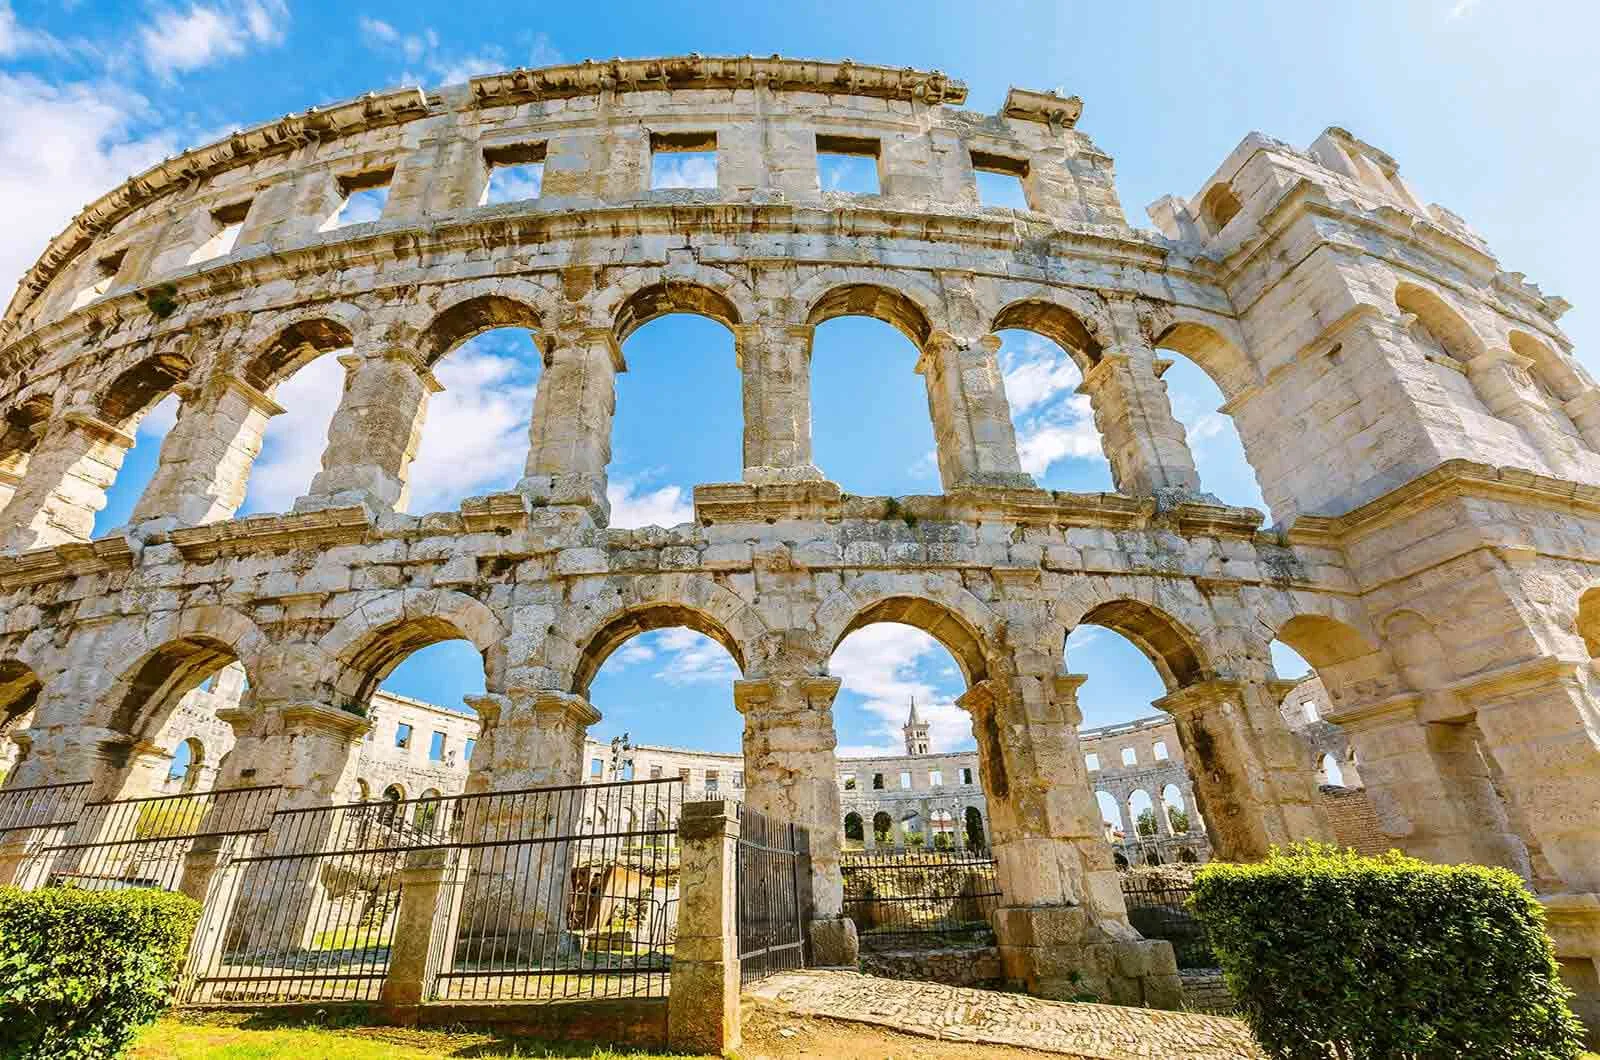 Exterior of an ancient Roman amphitheatre in Pula, Croatia. Concept of English to Croatian translation.